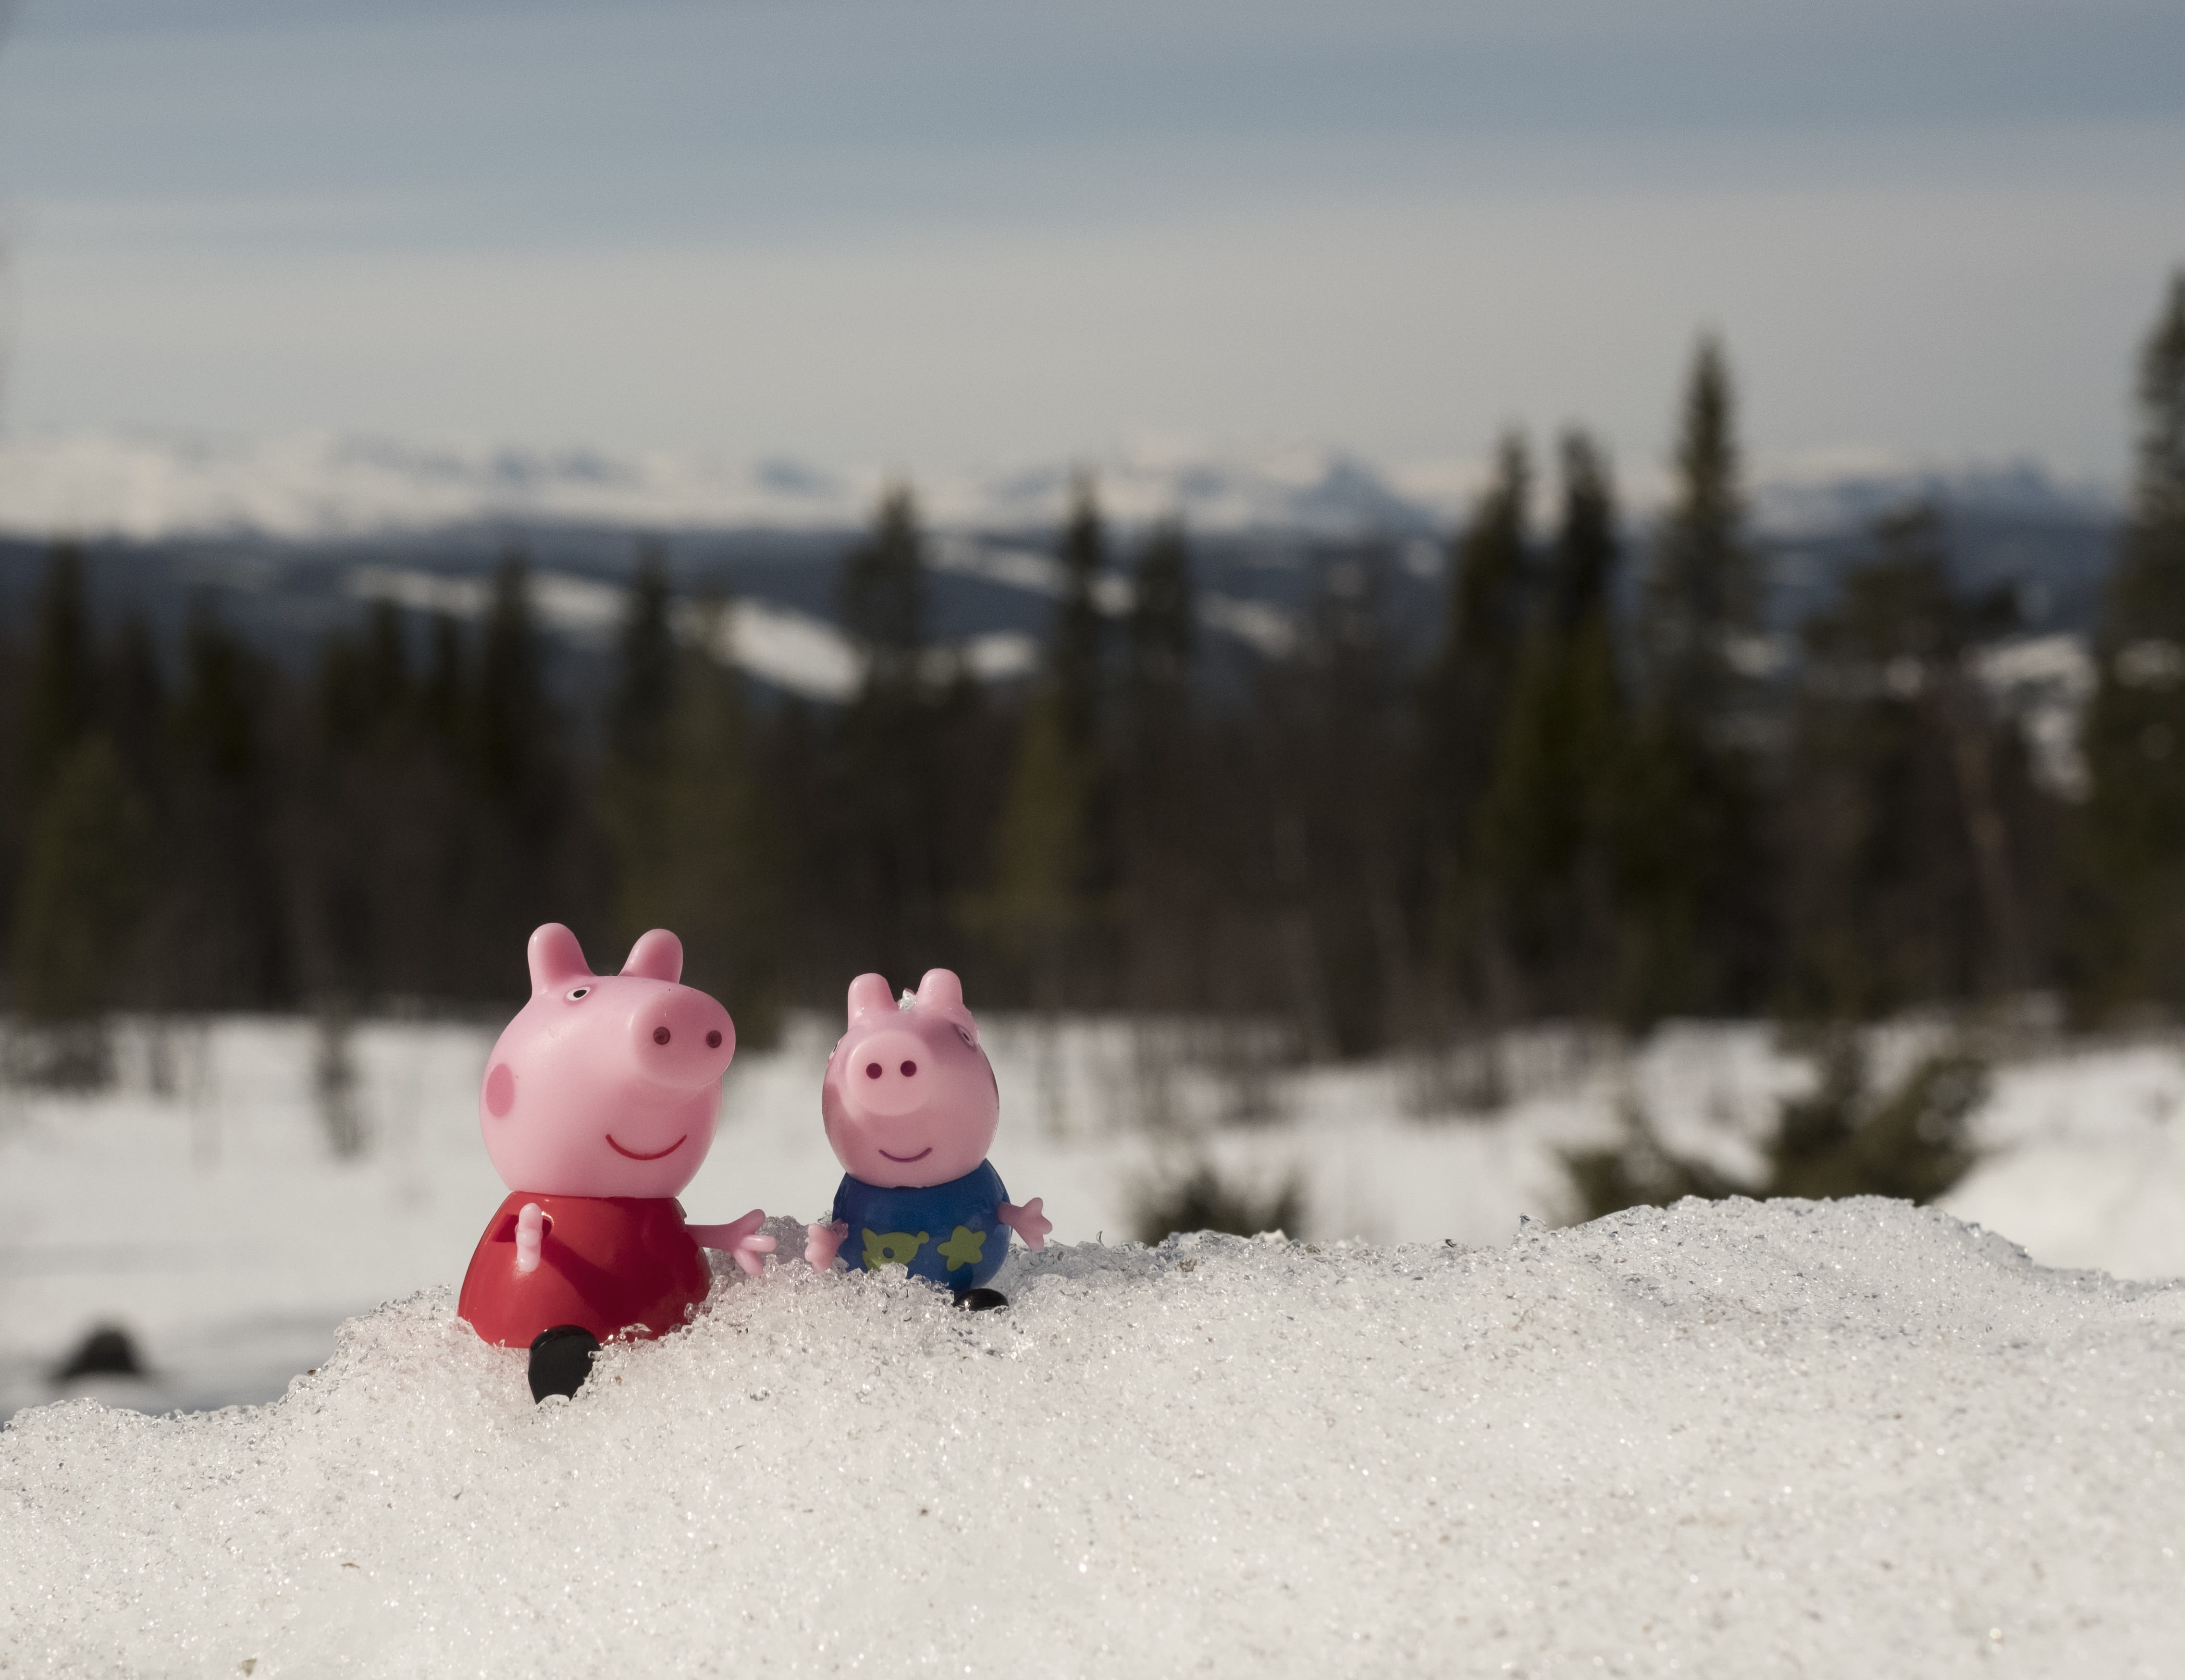 peppa pig, toy, figure, cute, nature, view, snow, winter, small